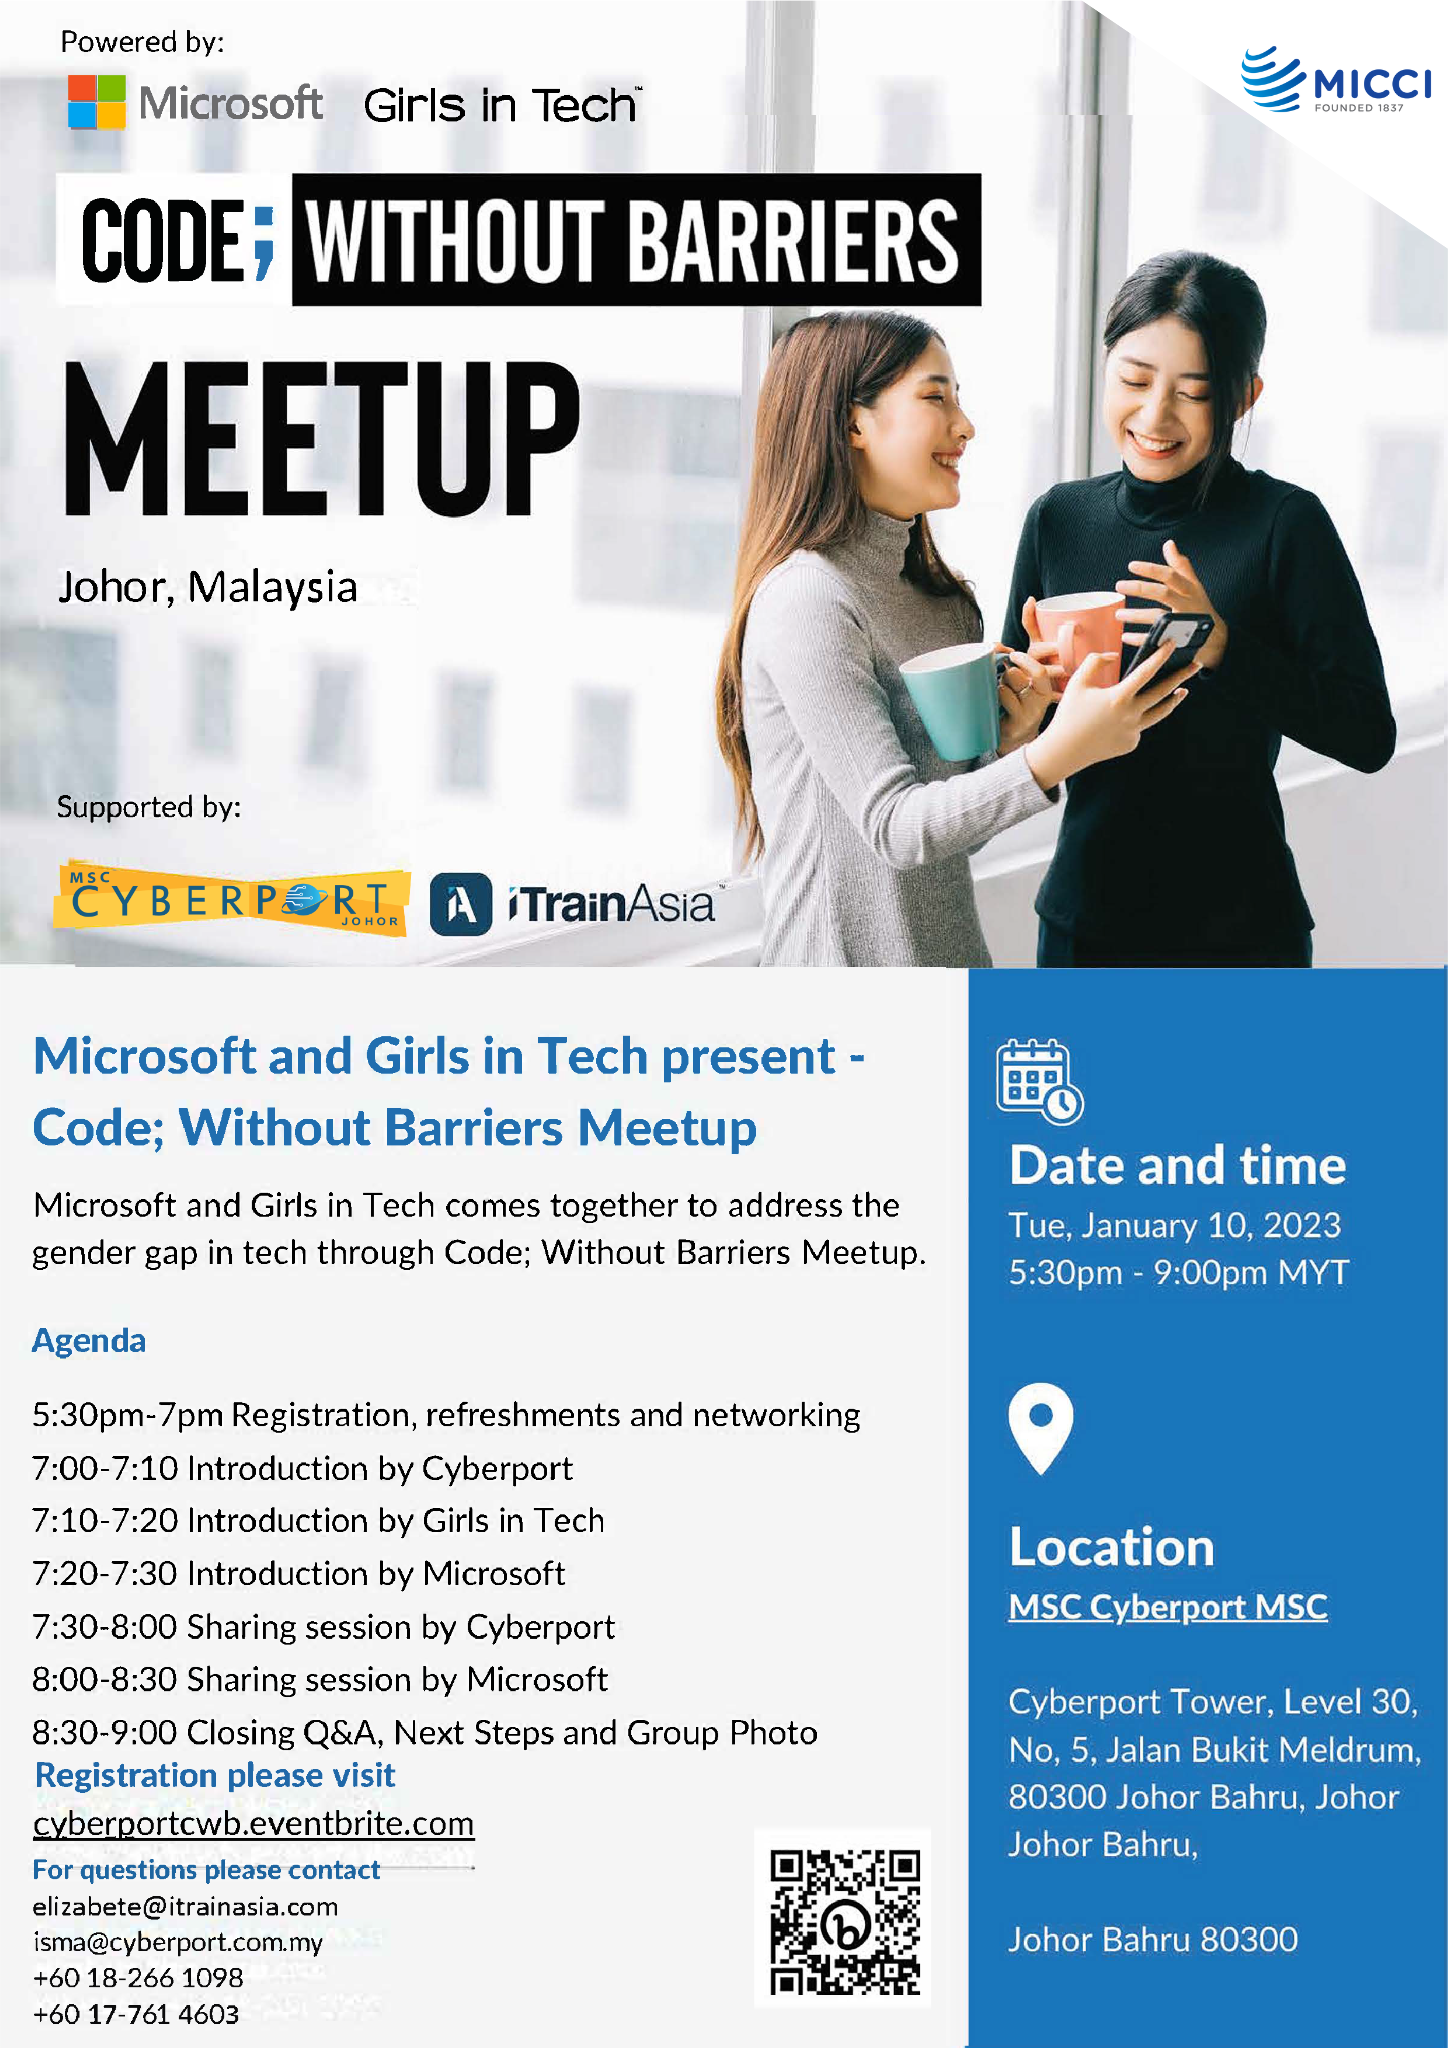 [Invitation For Ladies] Microsoft And Girls In Tech Present - Code: Without Barriers Meetup Johor